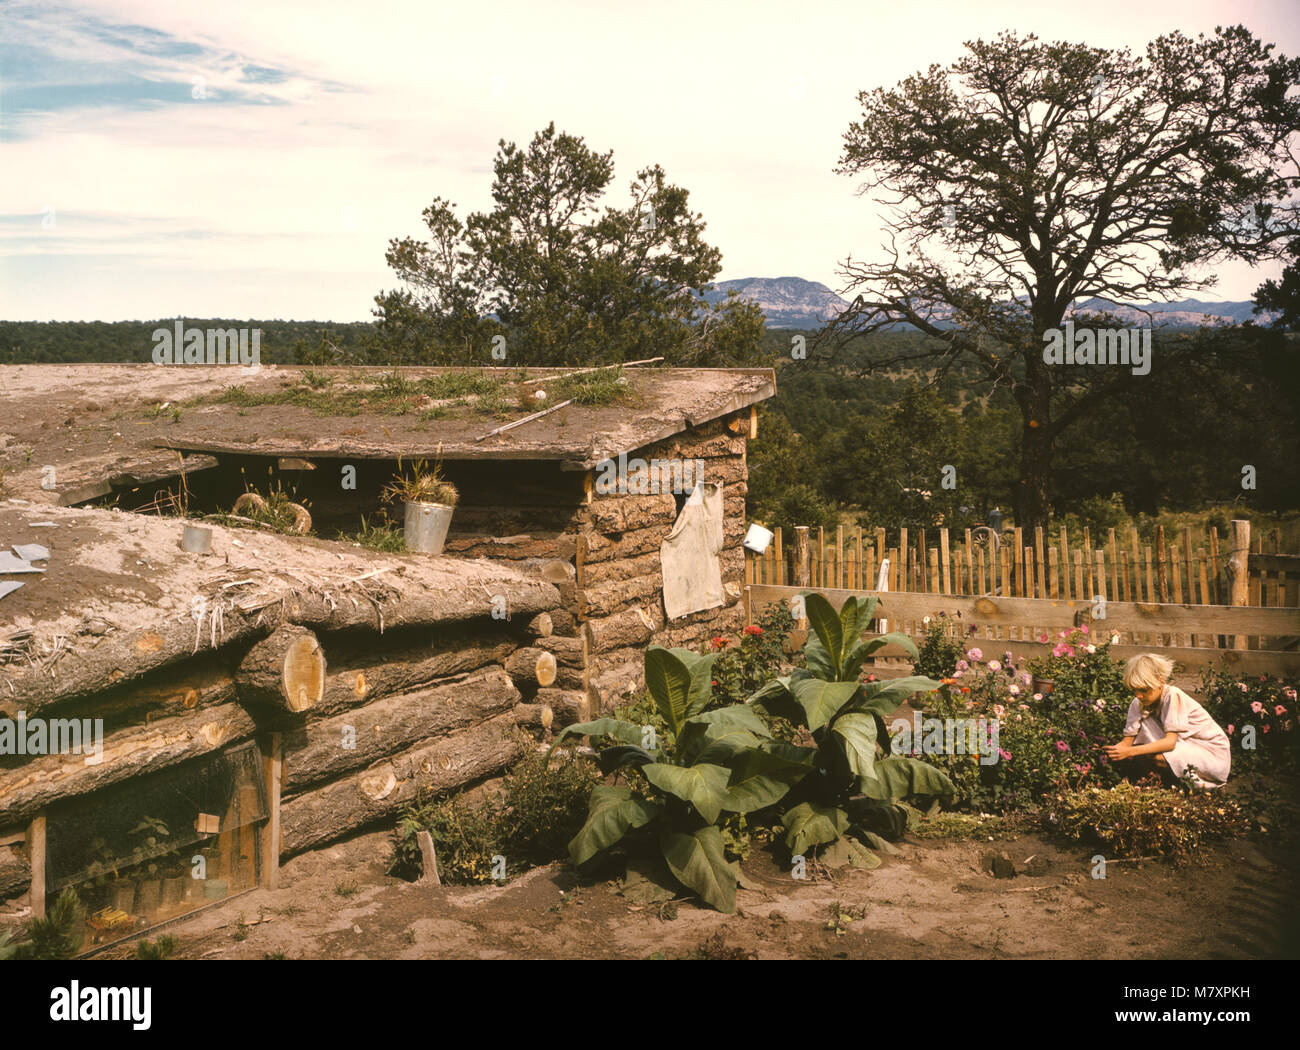 Garden Adjacent to Dugout Home of Jack Whinery, Homesteader, Pie Town, New Mexico, USA, Russell Lee for Farm Security Administration - Office of War Information, September 1940 Stock Photo